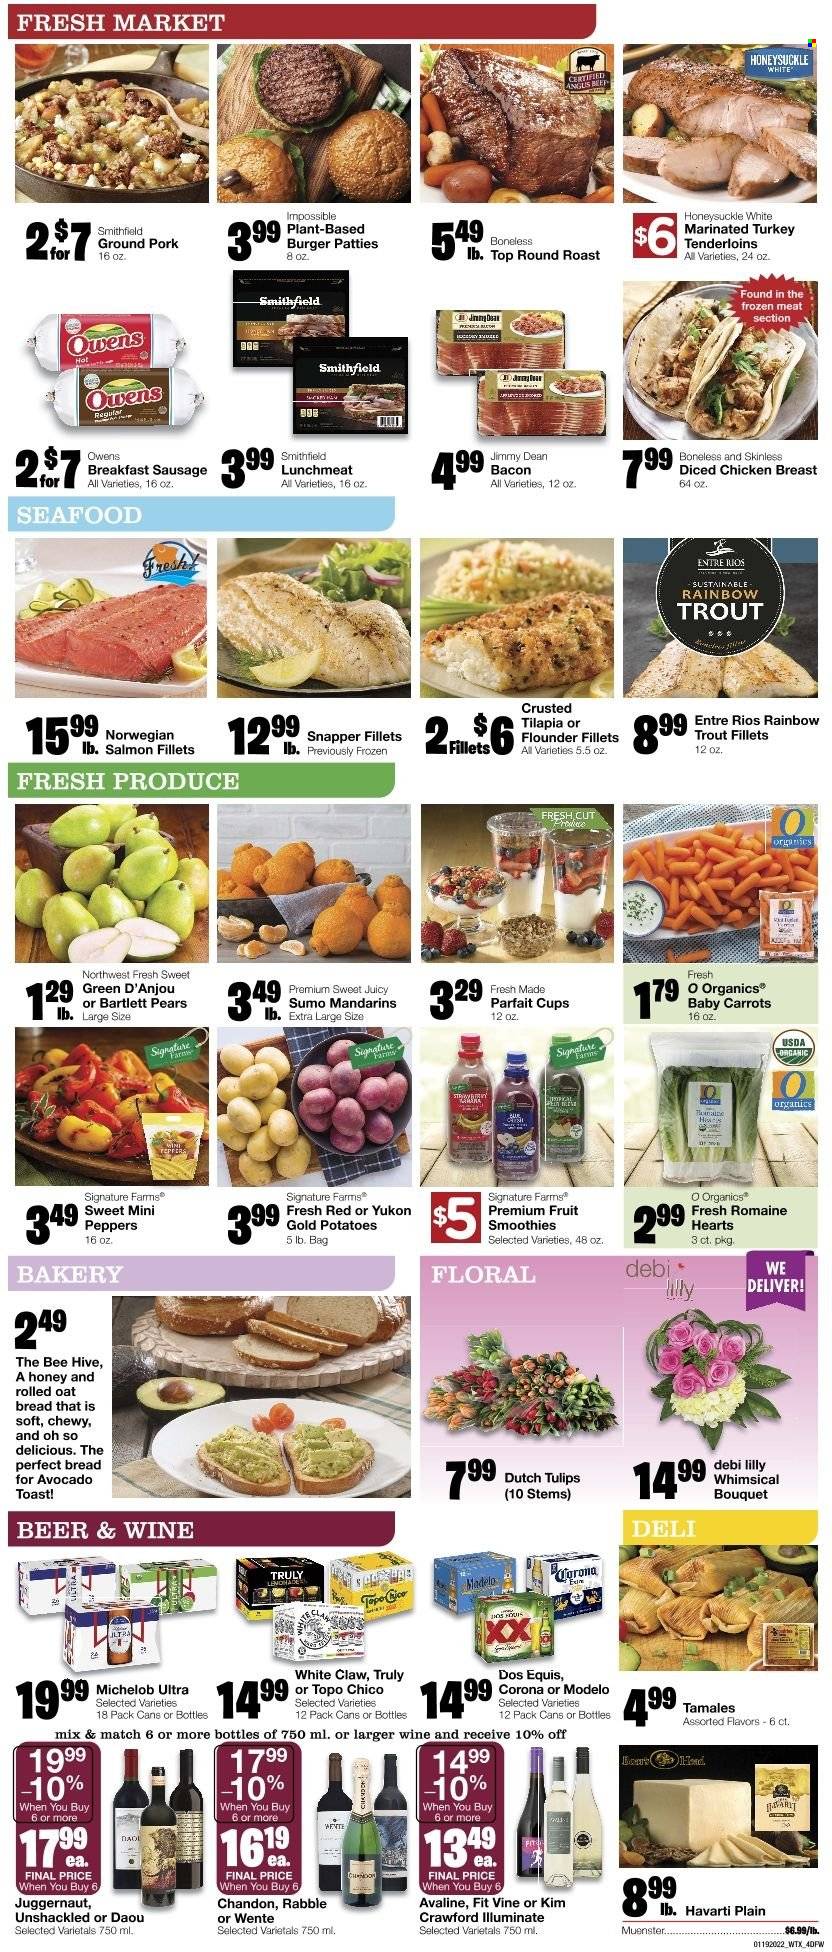 thumbnail - Market Street Flyer - 01/19/2022 - 01/25/2022 - Sales products - Bartlett pears, bread, carrots, potatoes, peppers, avocado, mandarines, pears, flounder, salmon, salmon fillet, tilapia, trout, seafood, hamburger, Jimmy Dean, sausage, lunch meat, Havarti, Münster cheese, oats, honey, smoothie, wine, White Claw, TRULY, beer, Corona Extra, Modelo, chicken breasts, turkey tenderloin, beef meat, round roast, ground pork, burger patties, cup, tulip, bouquet, Dos Equis, Michelob. Page 4.